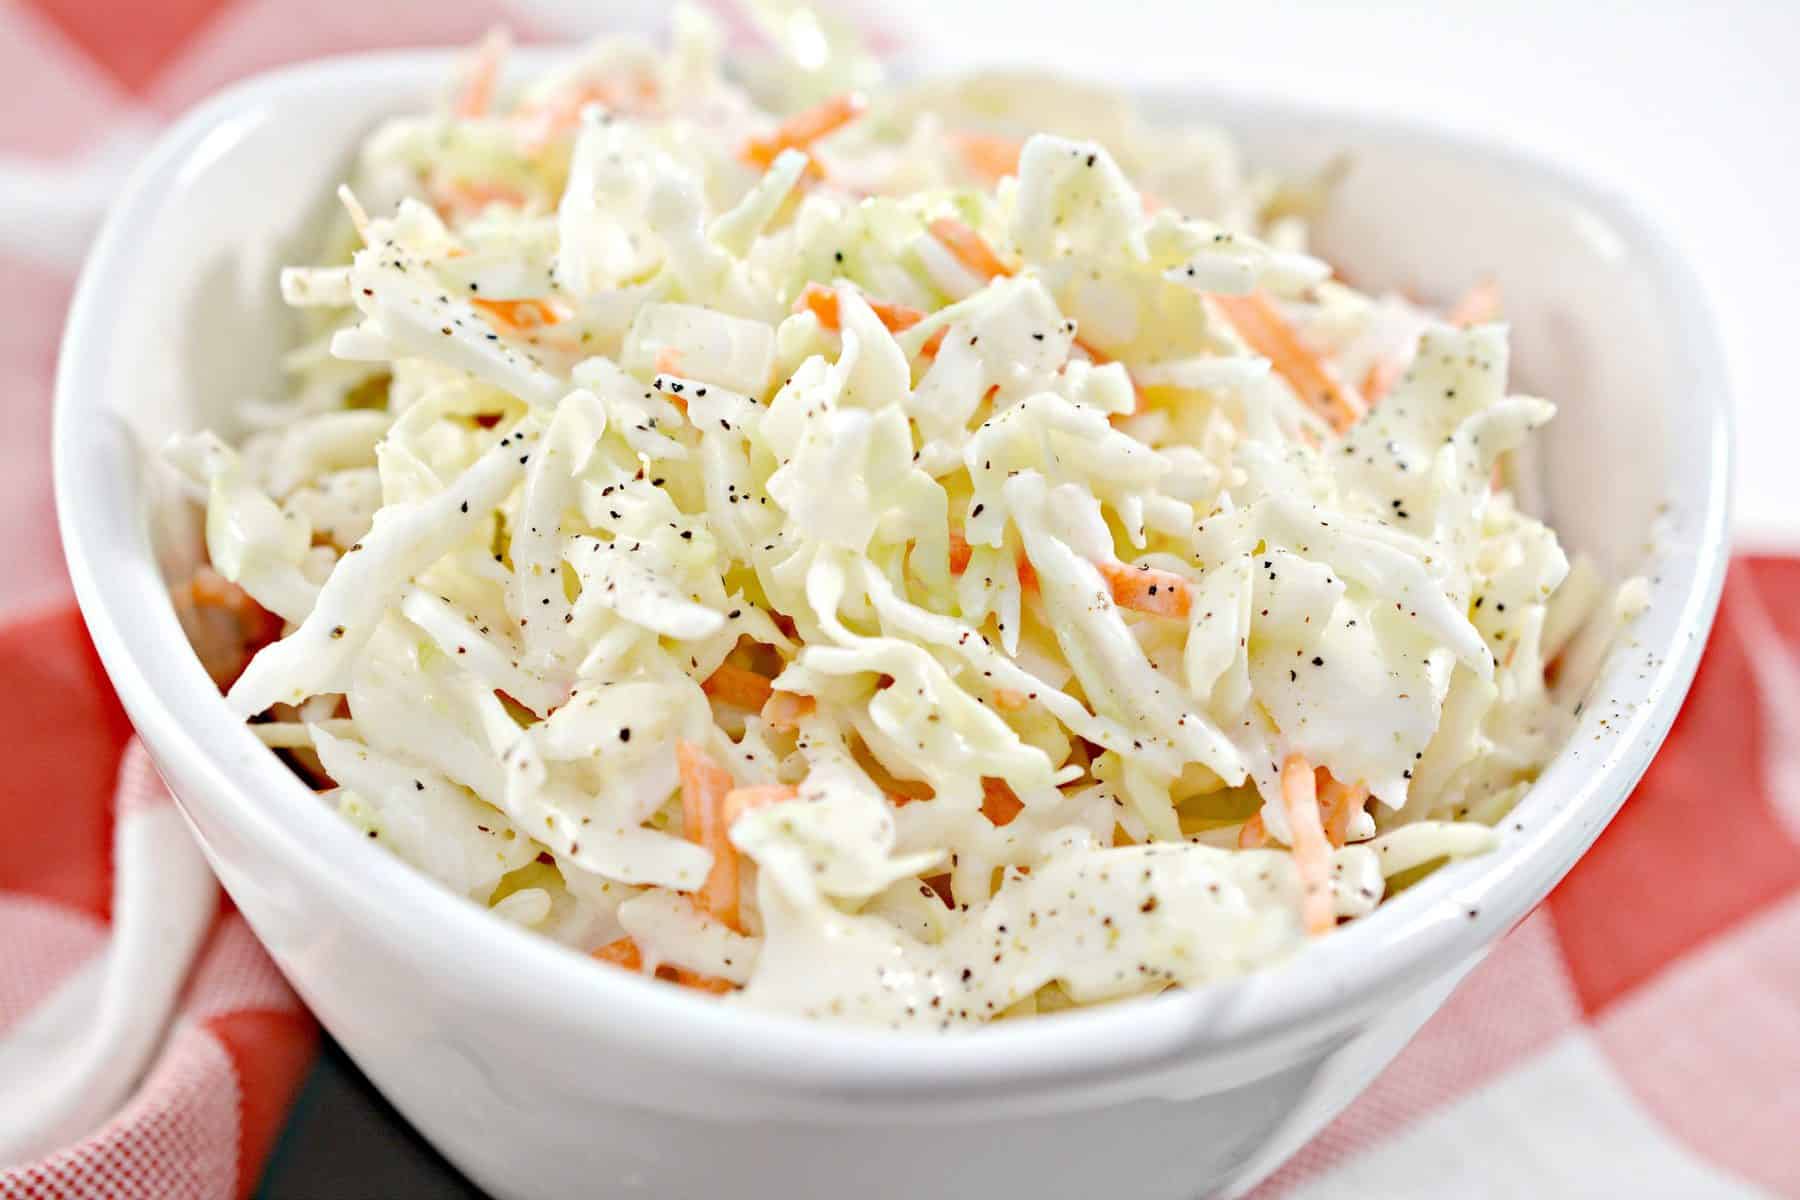 We loved this KFC Coleslaw, it tasted exactly like the original. Summer